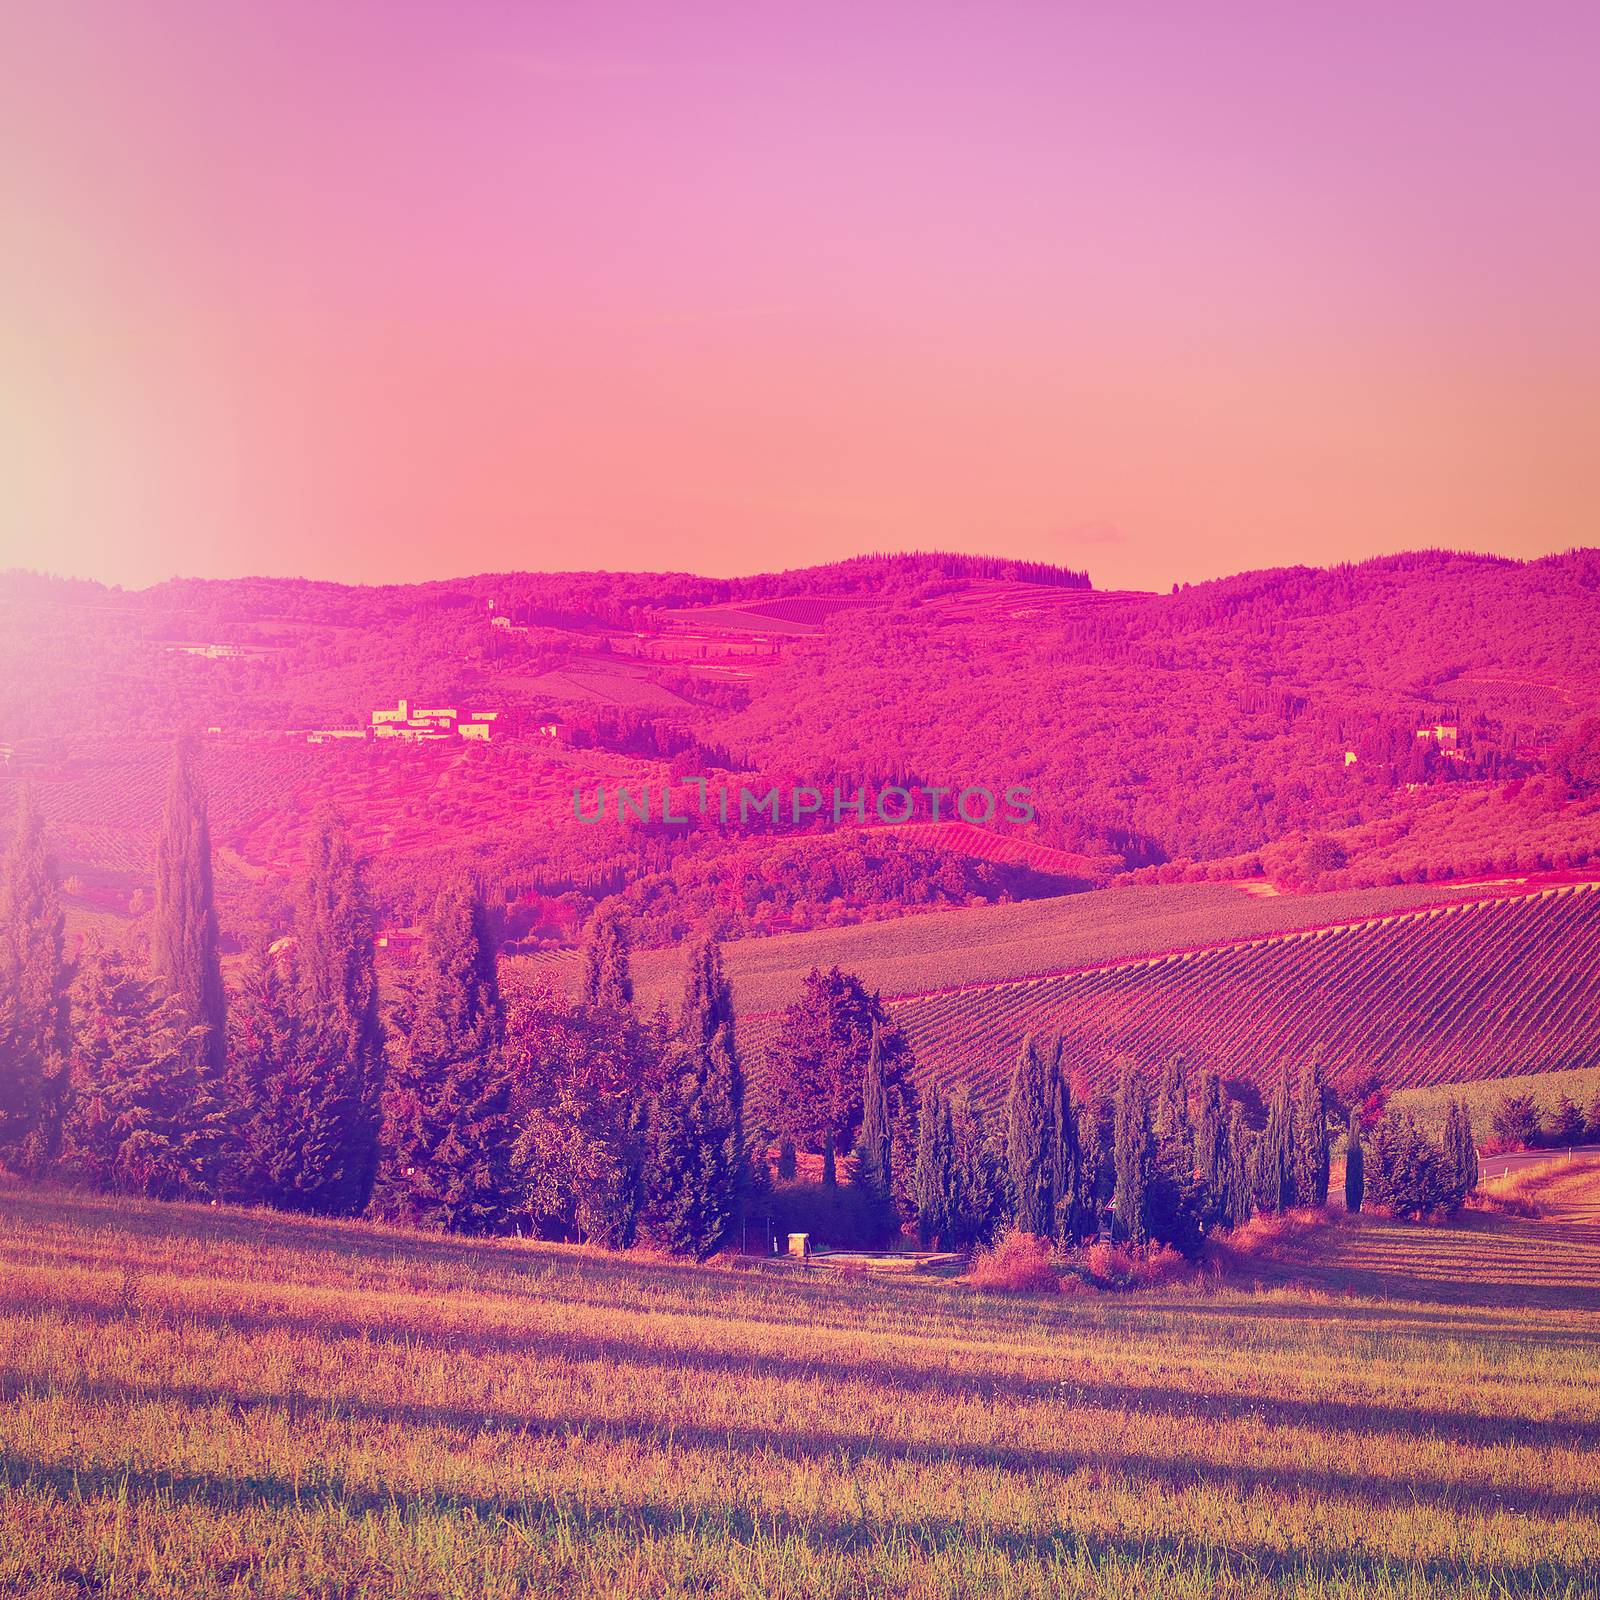 Hill of Tuscany with Vineyard at Sunset, Instagram Effect